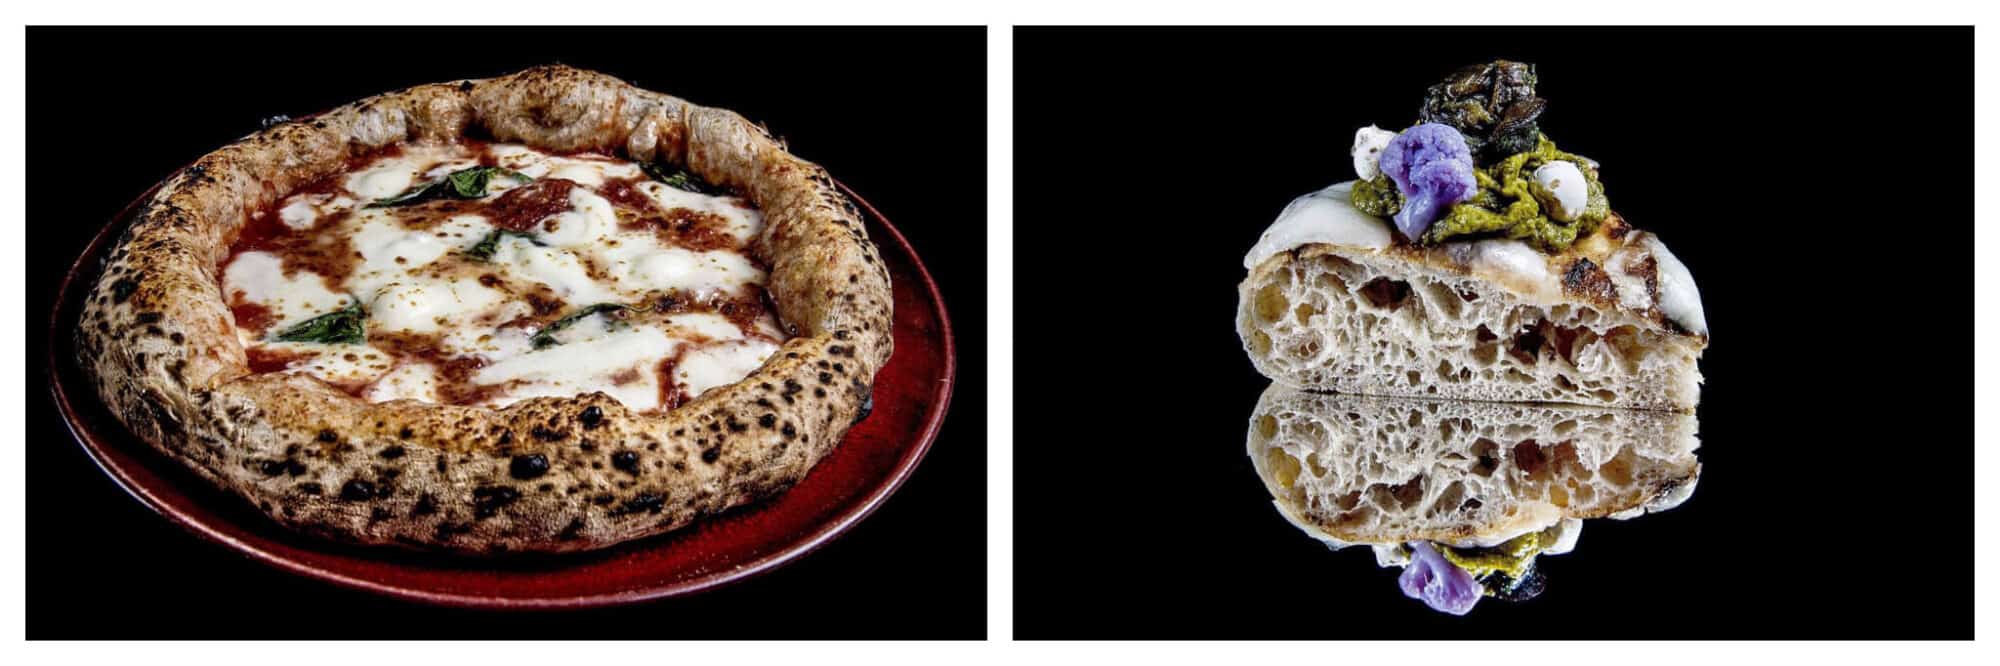 Left: a margarita pizza on a red plate with a black background. Right: a slice of thick dough pizza with a green pesto and purple broccoli topping on a black background.